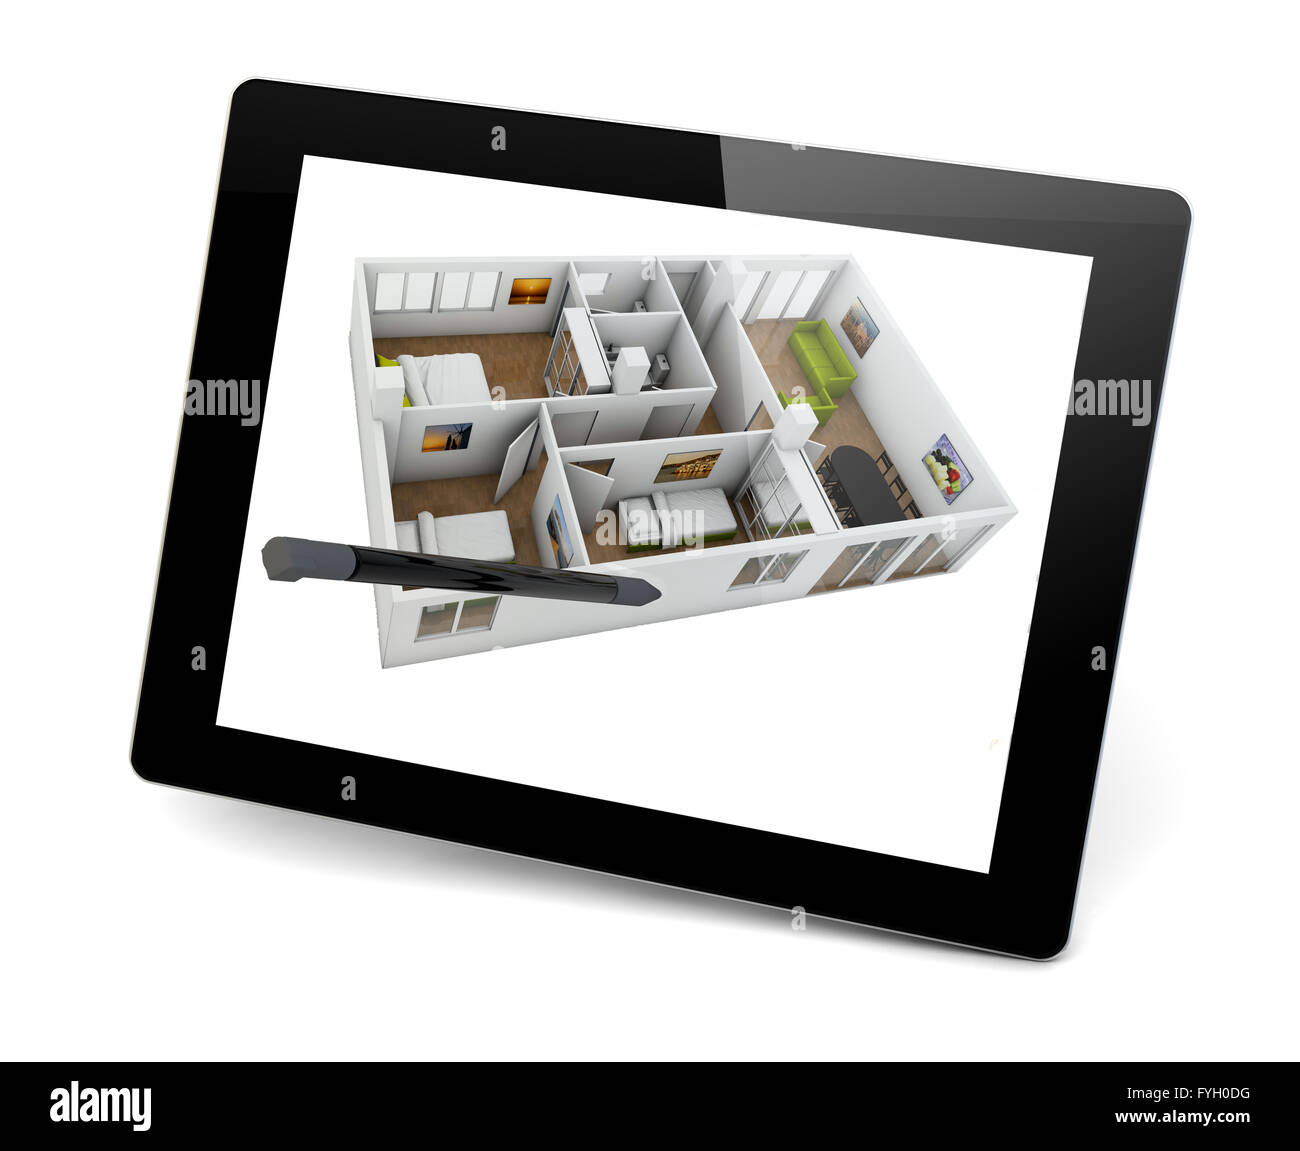 designing a 3d house on a tablet pc concept: glossy tablet pc with a pen and a house project on the screen isolated on white Stock Photo